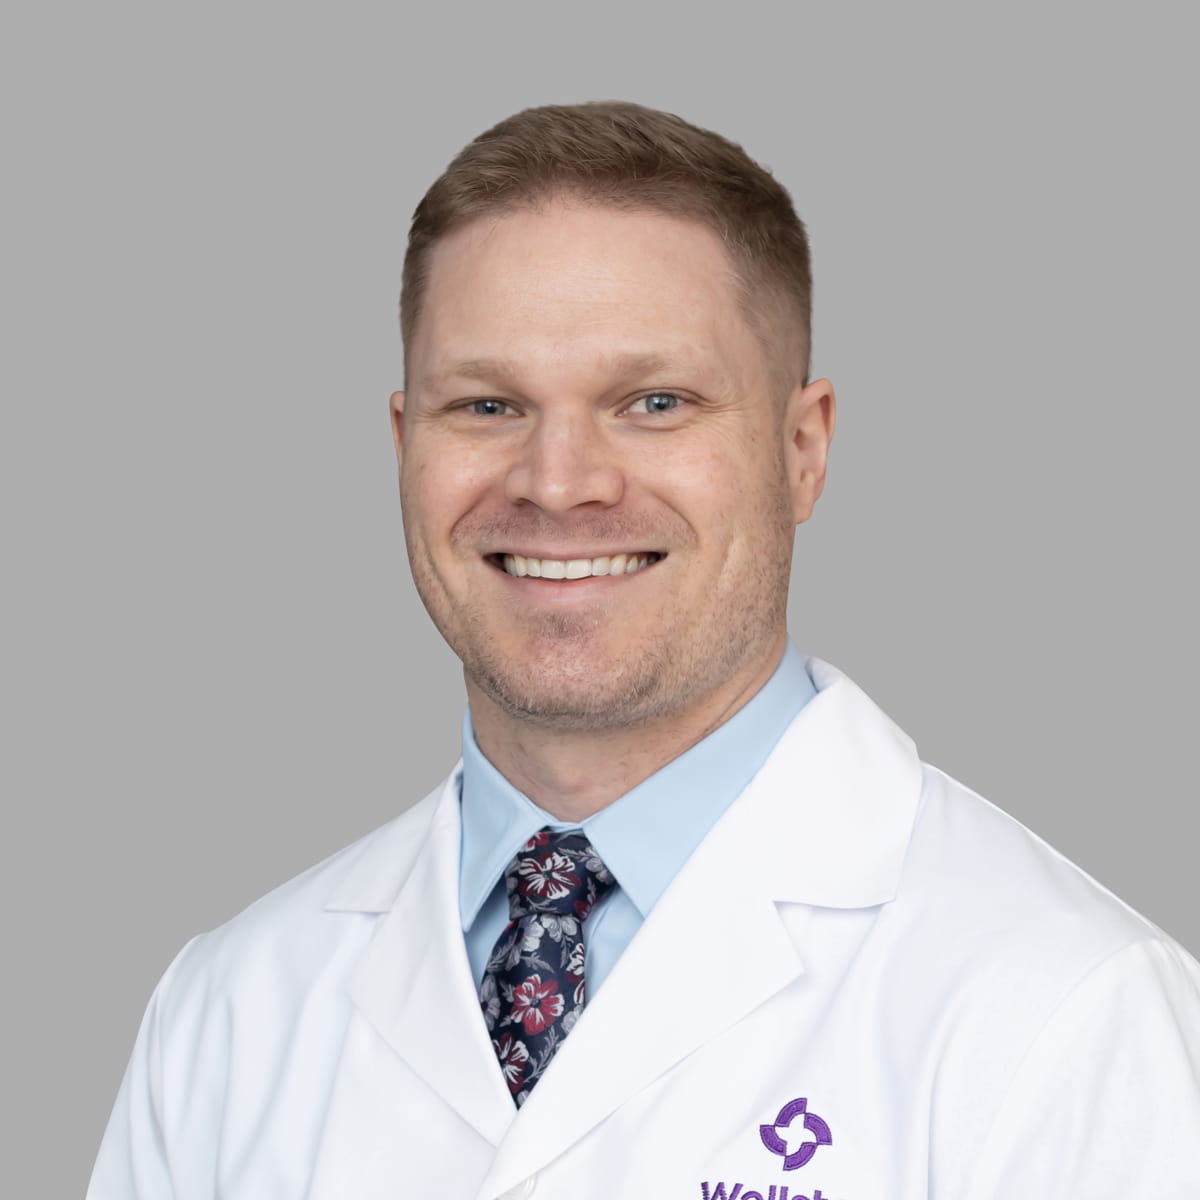 A friendly image of Jeffrey Williams MD